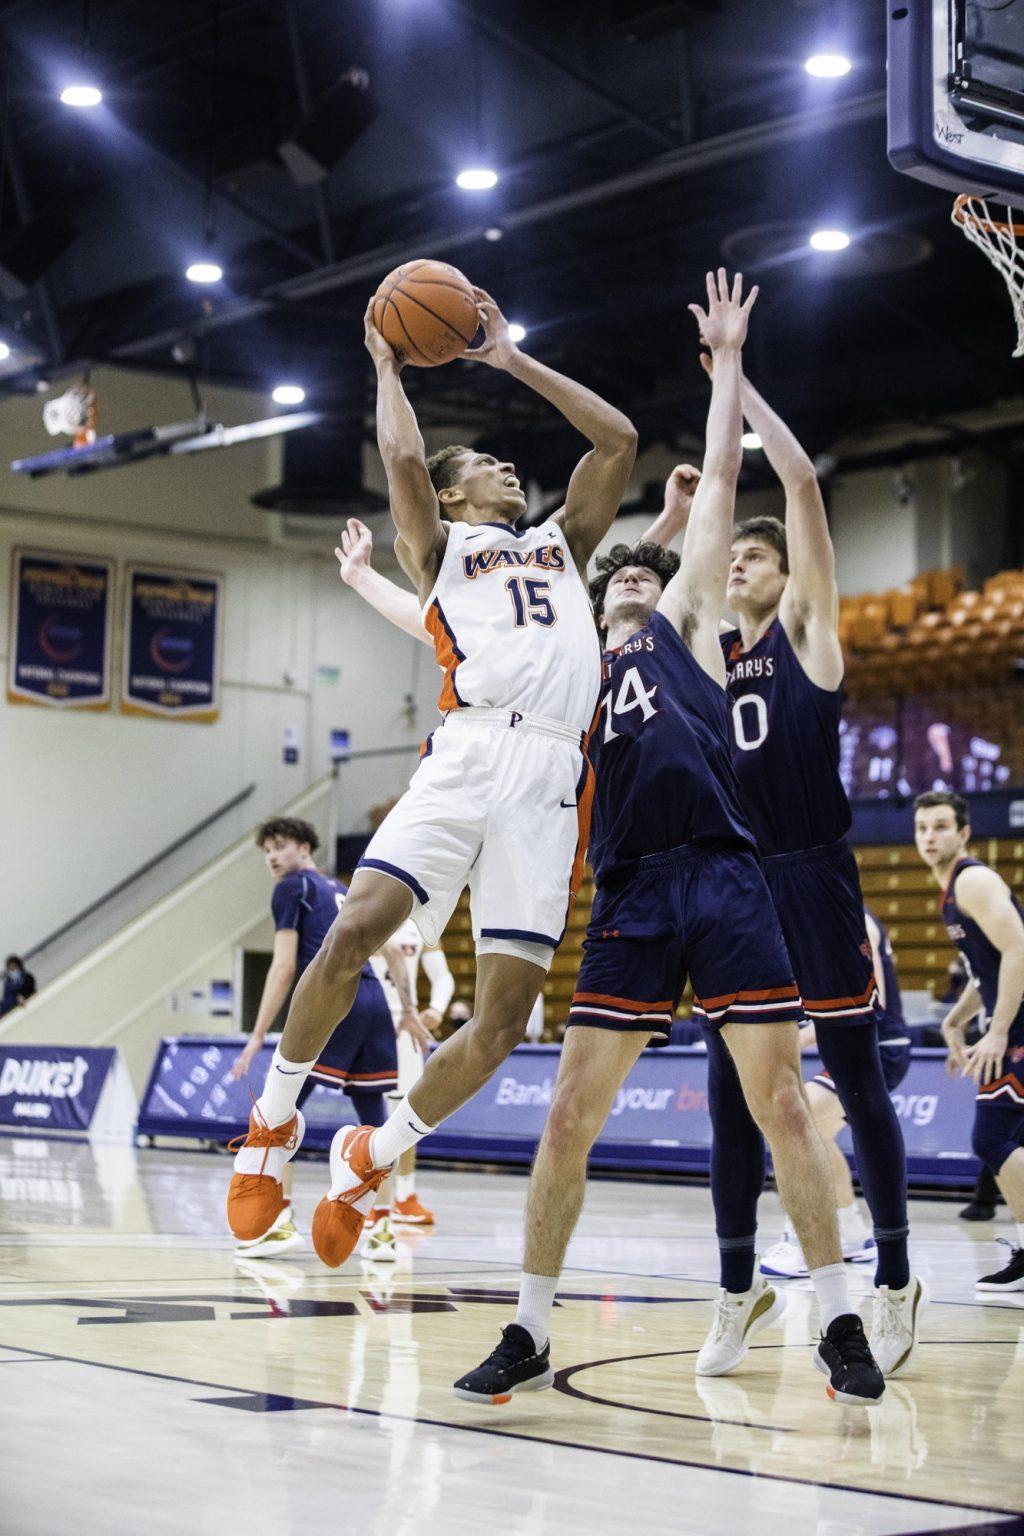 Junior forward Kessler Edwards (No. 15) goes up for a contested layup against sophomore forward Kyle Bowen (No. 14) and freshman center Mitchell Saxen (No. 10). The forward scored 15 points and grabbed 5 rebounds.